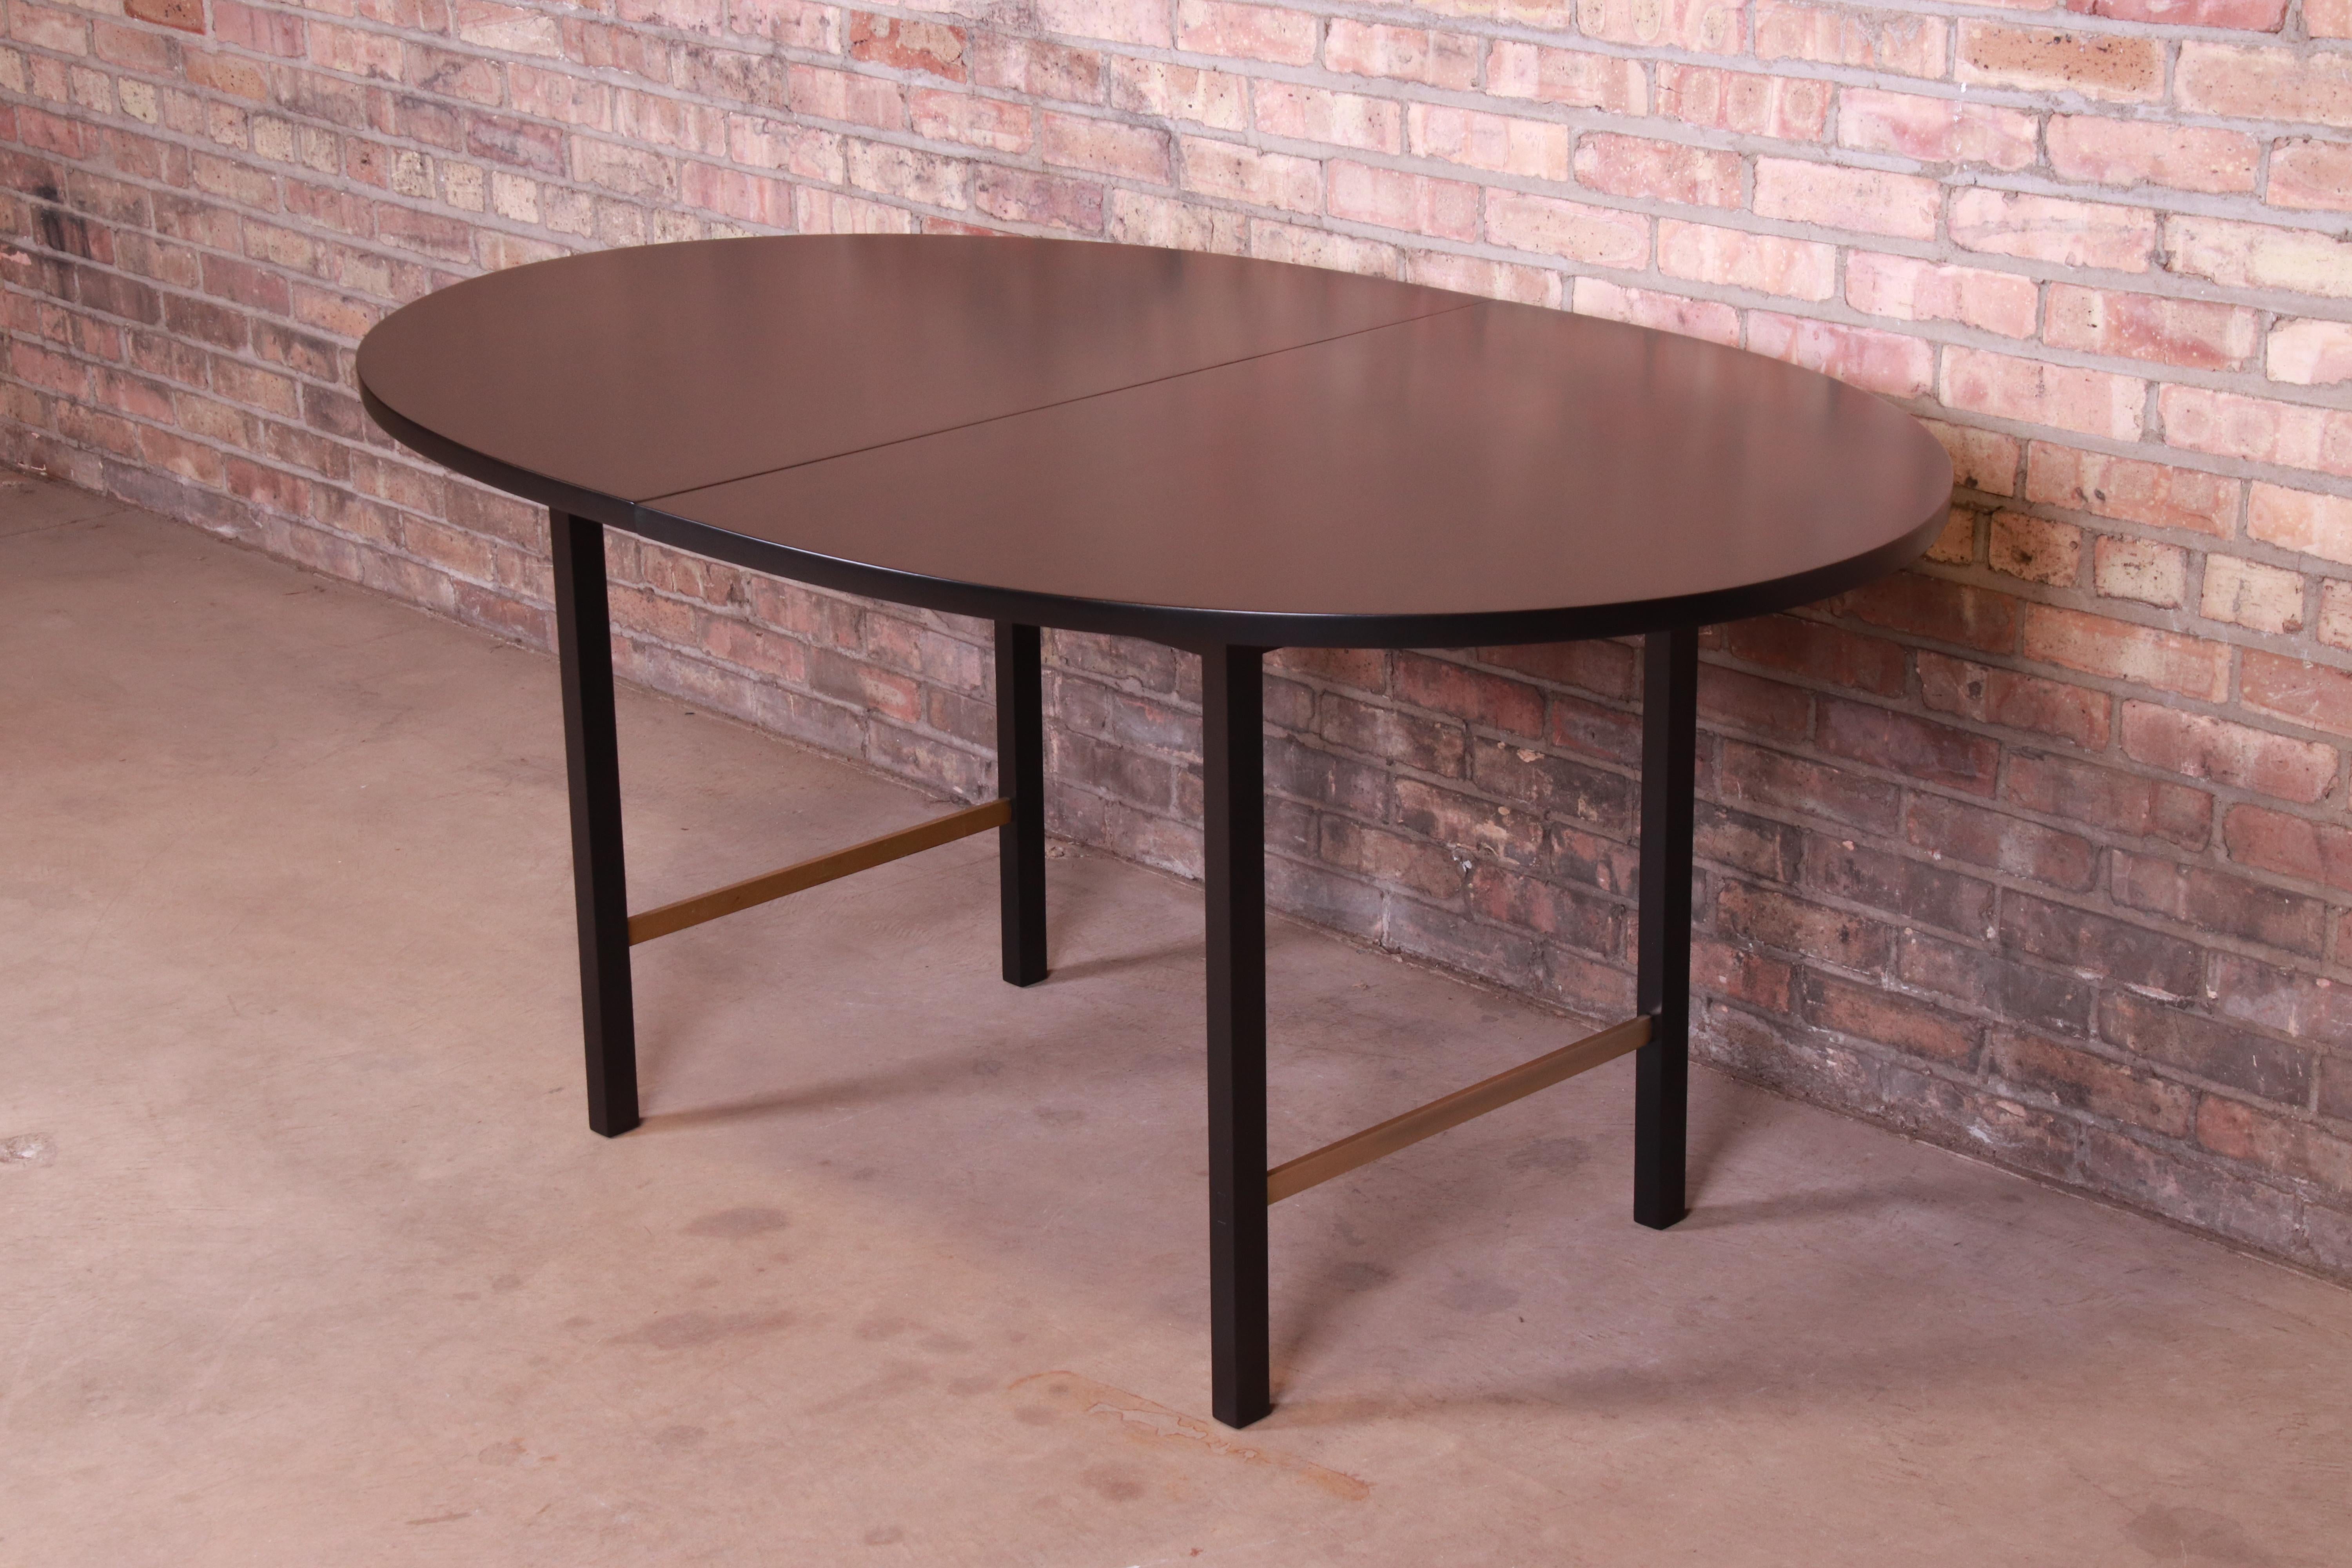 Mid-20th Century Paul McCobb for Calvin Black Lacquer and Brass Dining Table, Newly Refinished For Sale